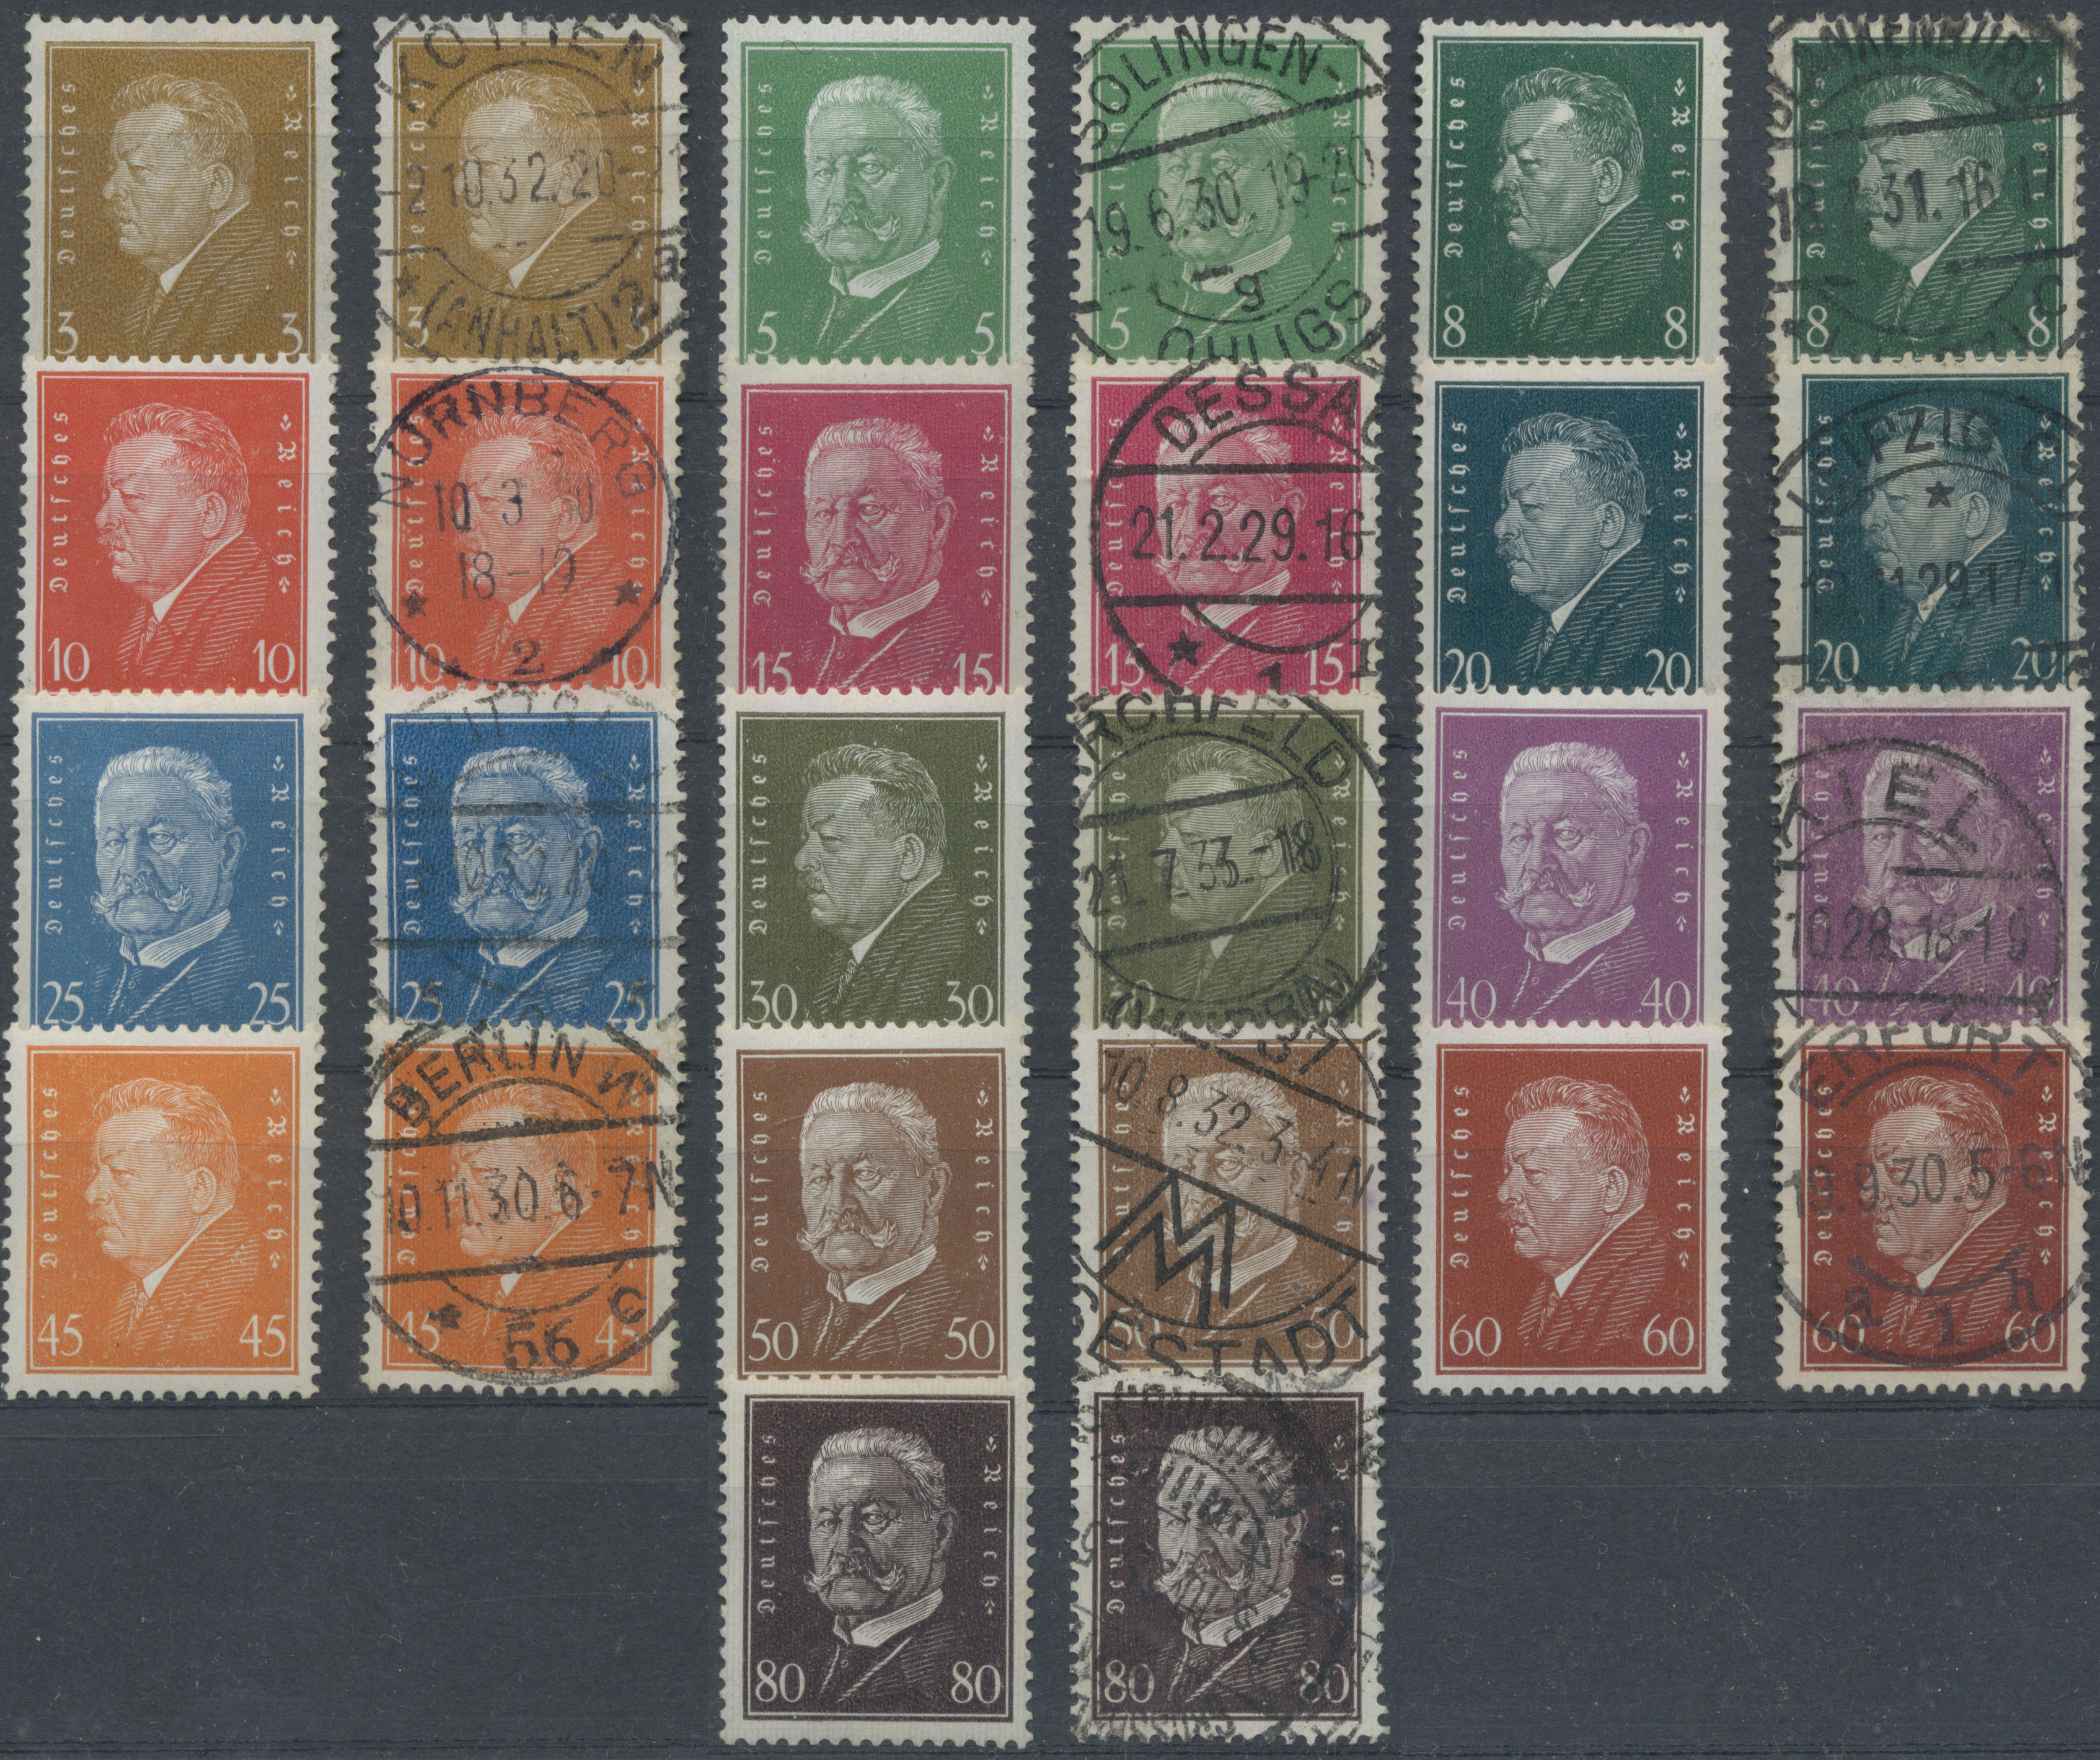 Lot 36519 - Deutsches Reich  -  Auktionshaus Christoph Gärtner GmbH & Co. KG Sale #44 Collections Germany